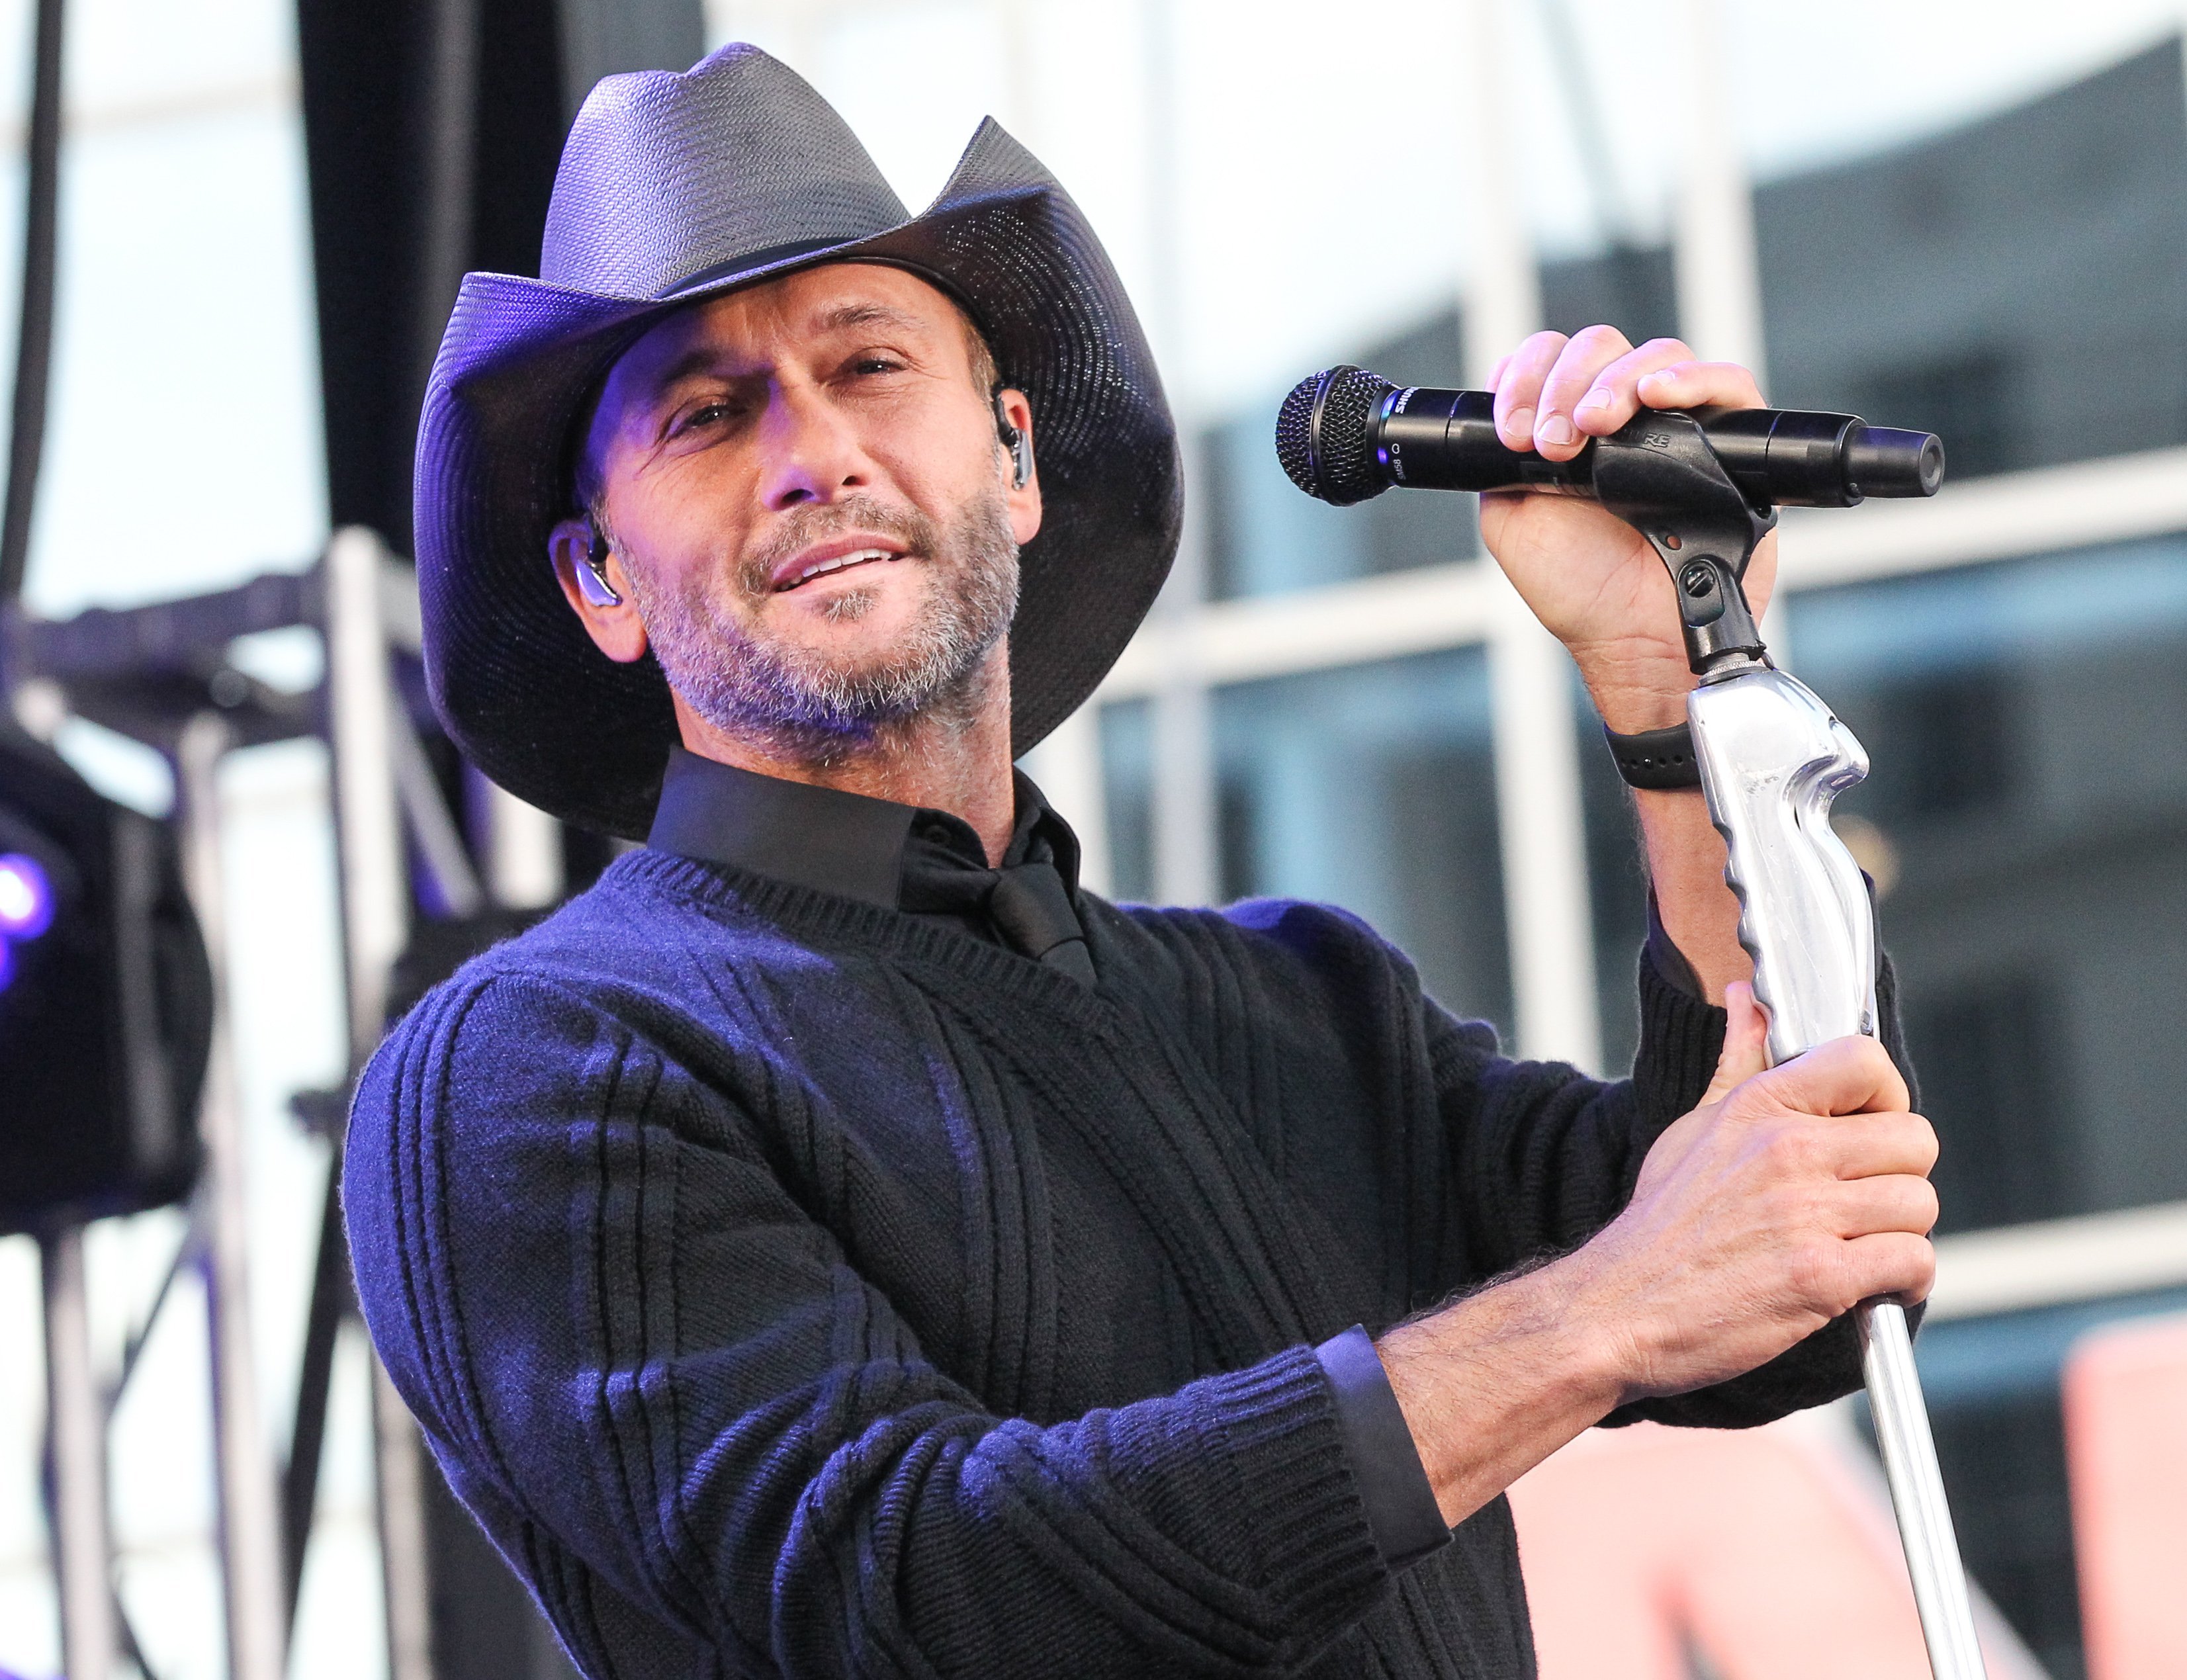 Tim McGraw Performs On ABC's "Good Morning America"on November 4, 2015. | Photo: GettyImages